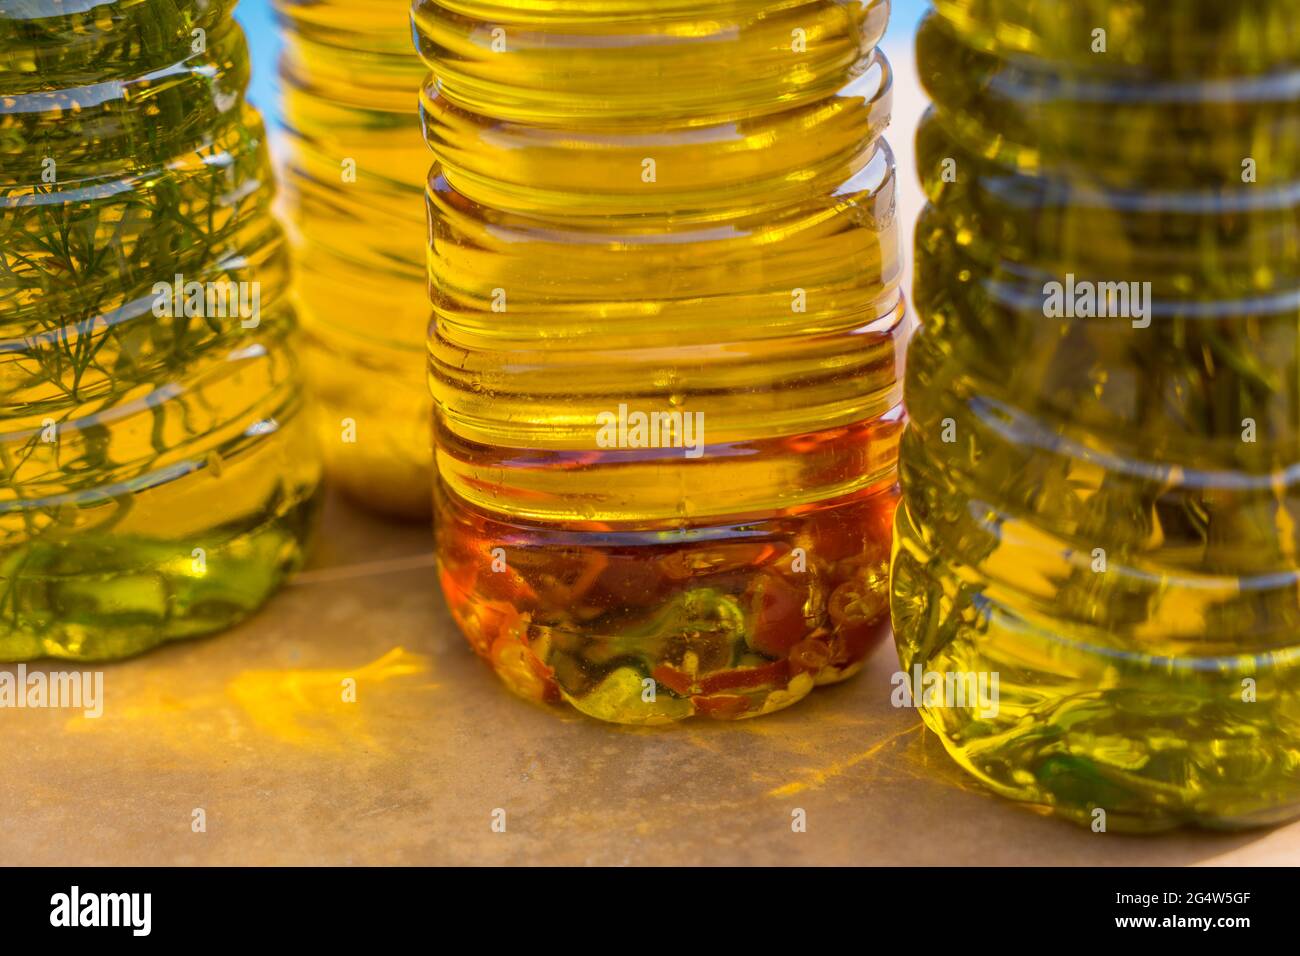 series of aromatic golden olive oils enriched with spicy chili and mediterranean herbs Stock Photo